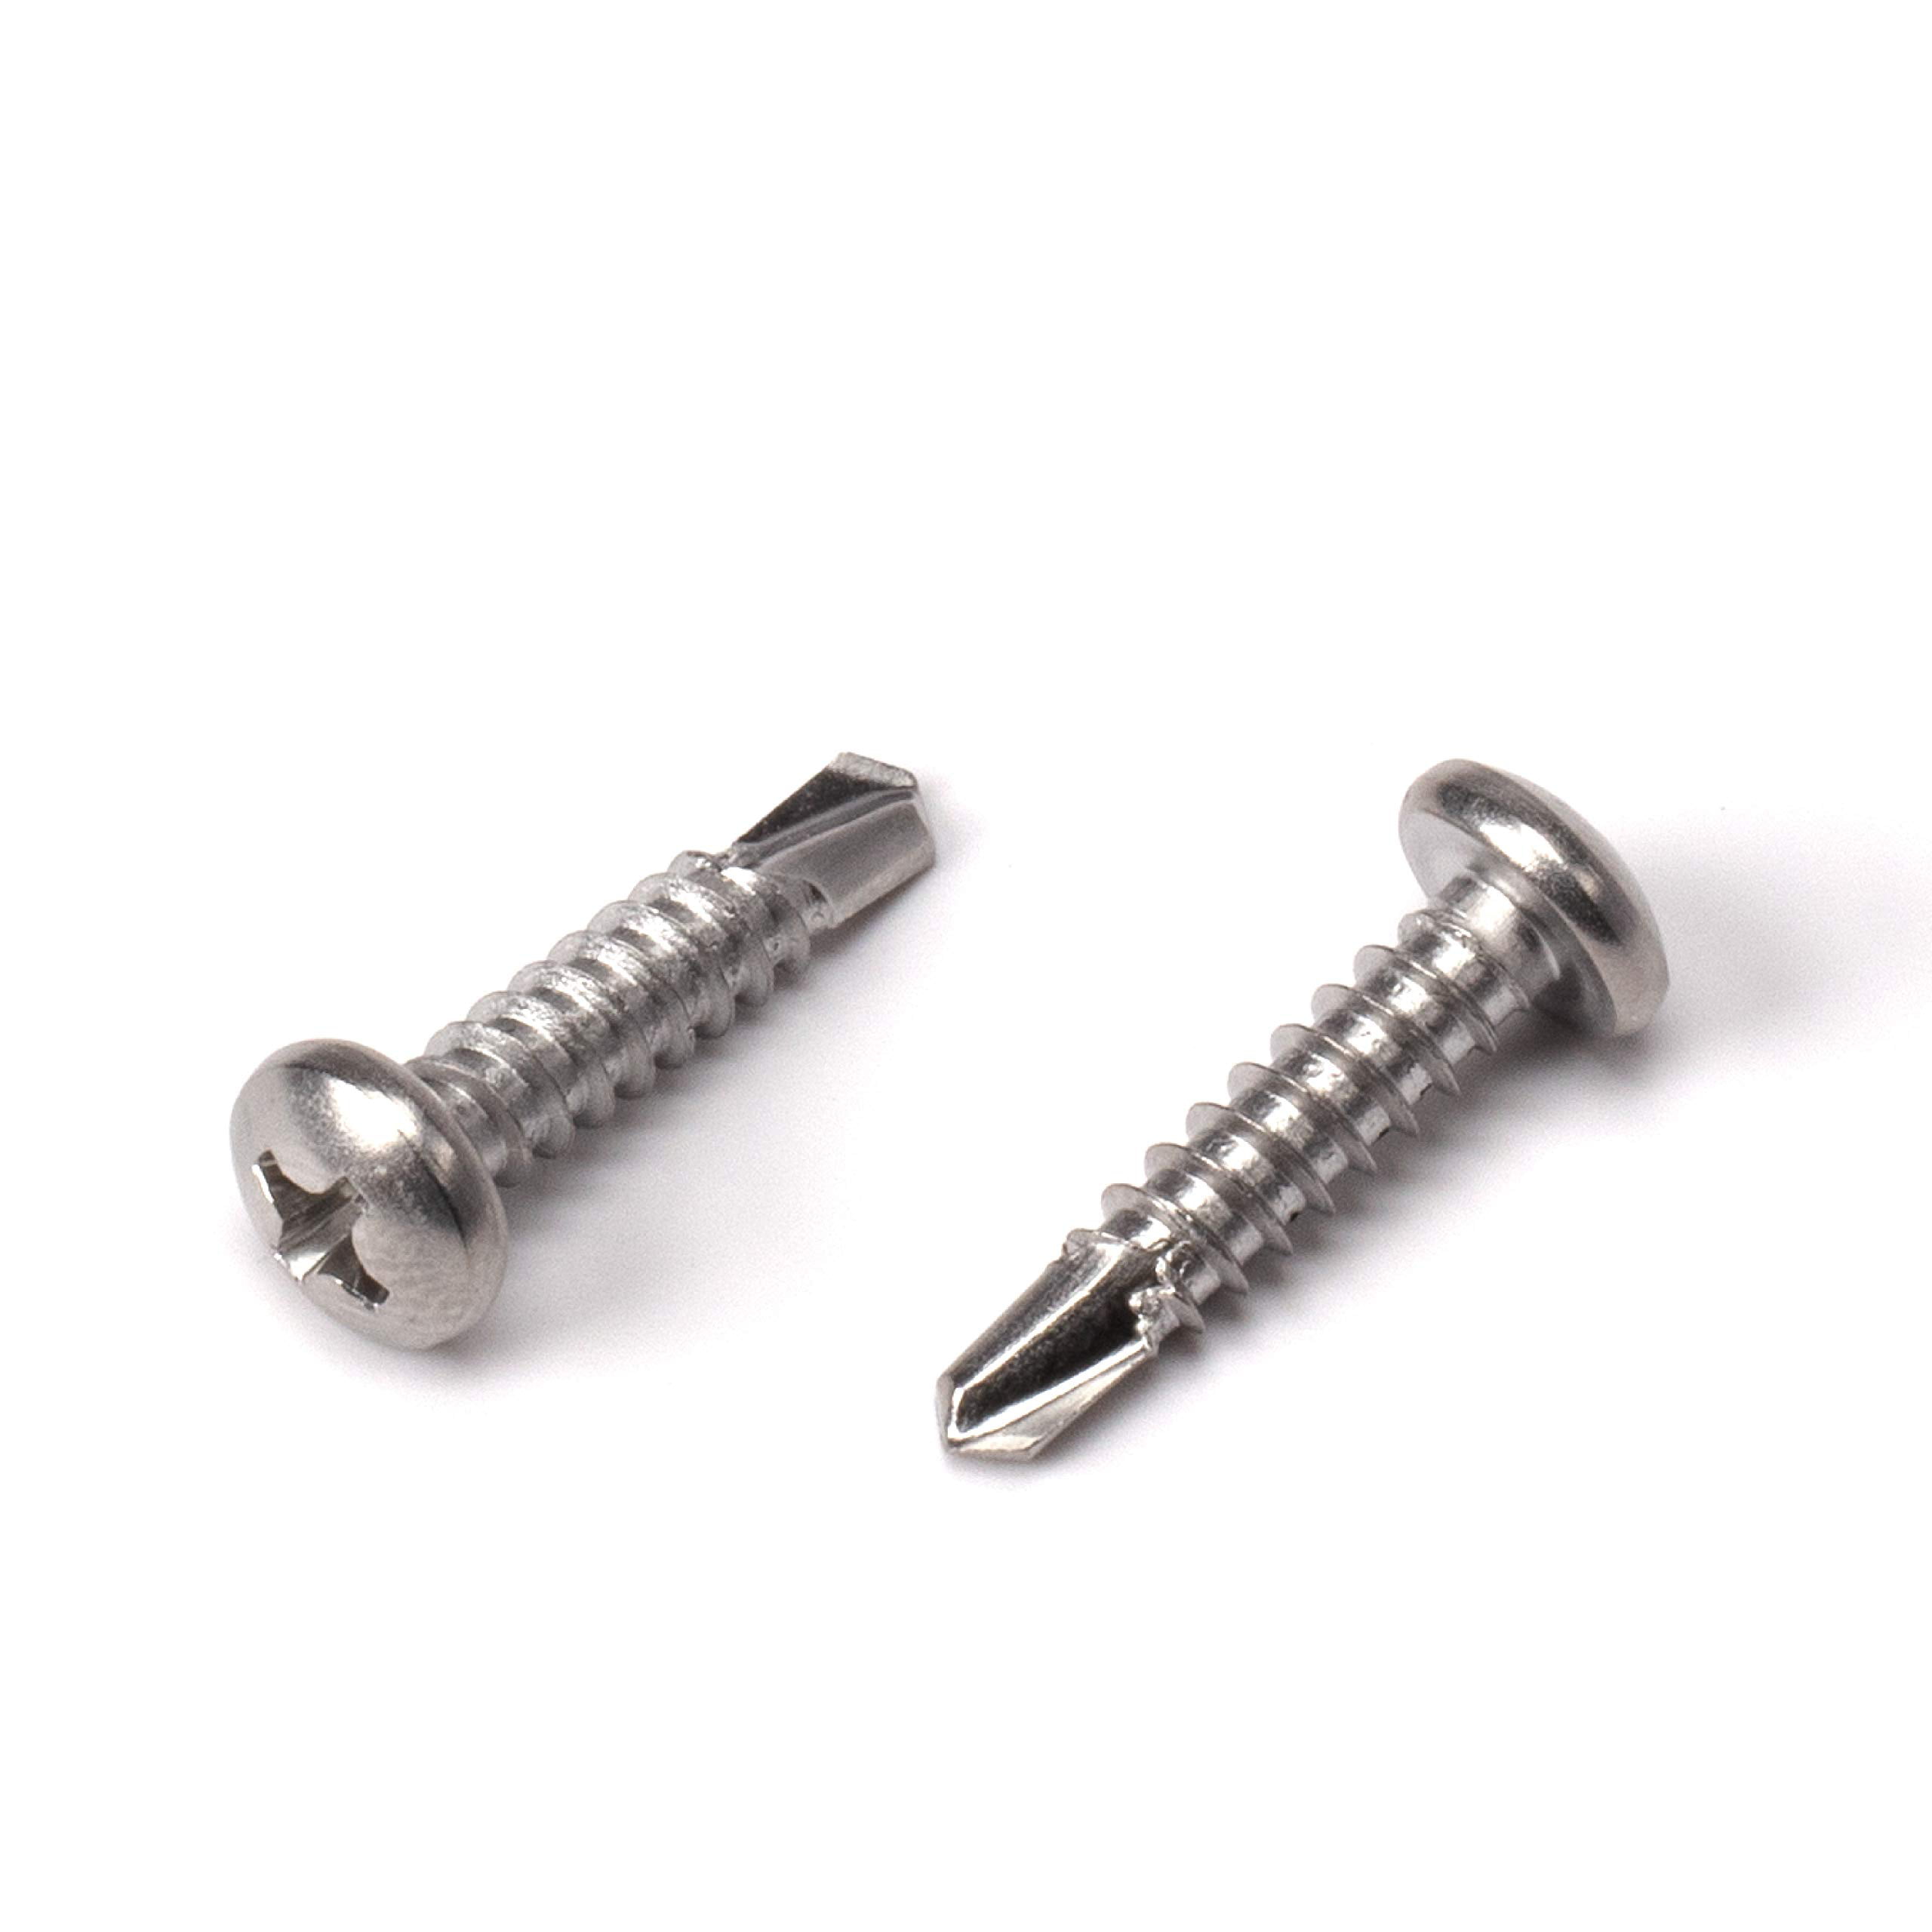 THE CIMPLE CO - 100pc Stainless Steel Self Drilling Tapping Screws #8 x Stainless Steel Pan Head Self Drilling Screws